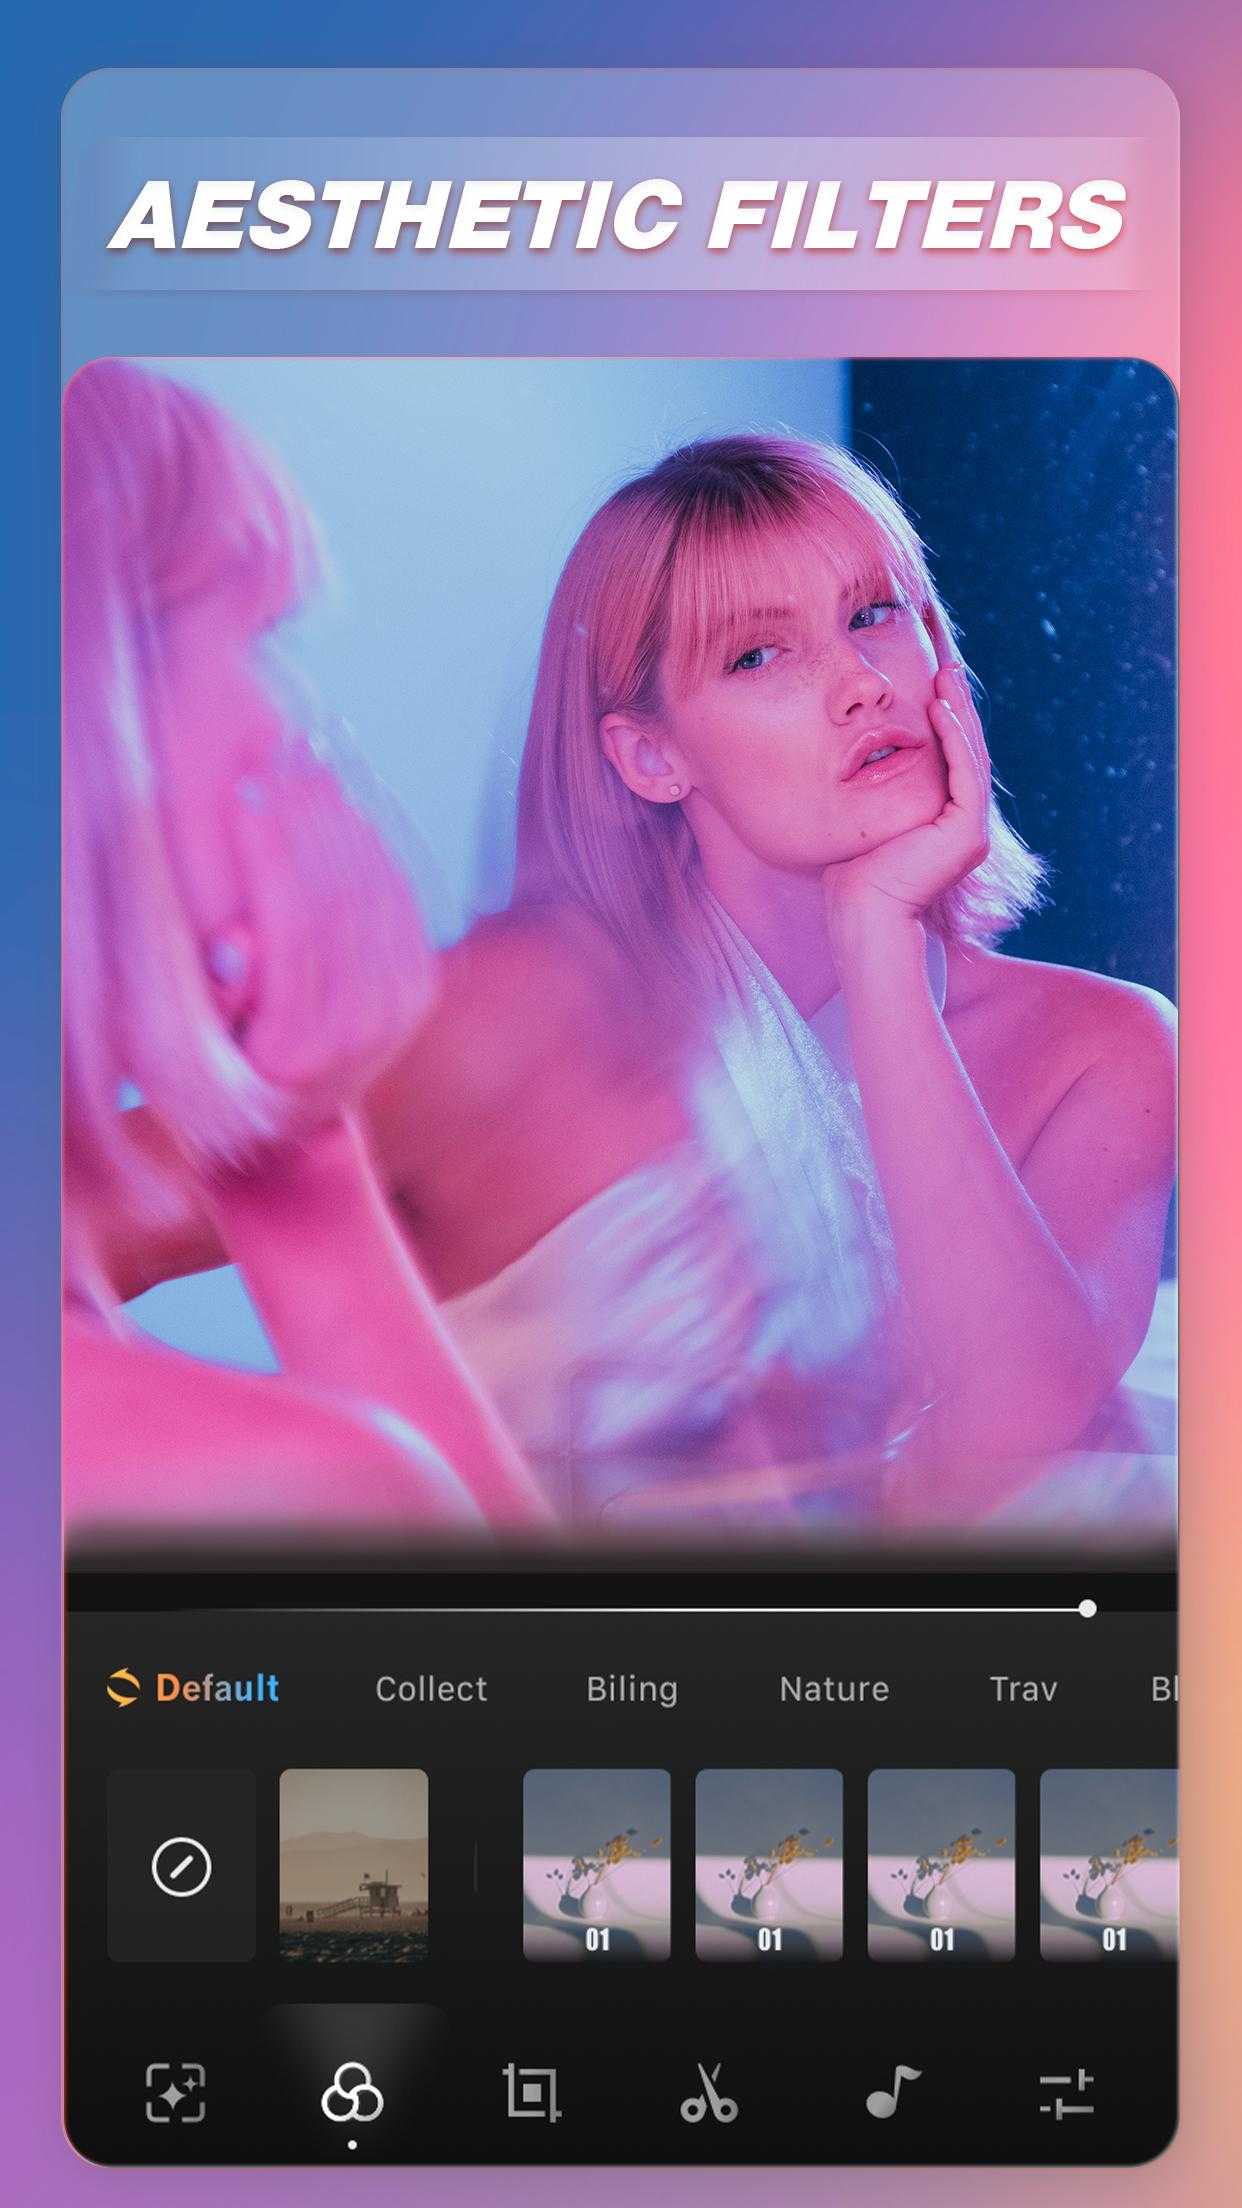 Video Effects & Aesthetic Filter Editor – Fito.ly v3.3.130 (Mod) (Premium) APK